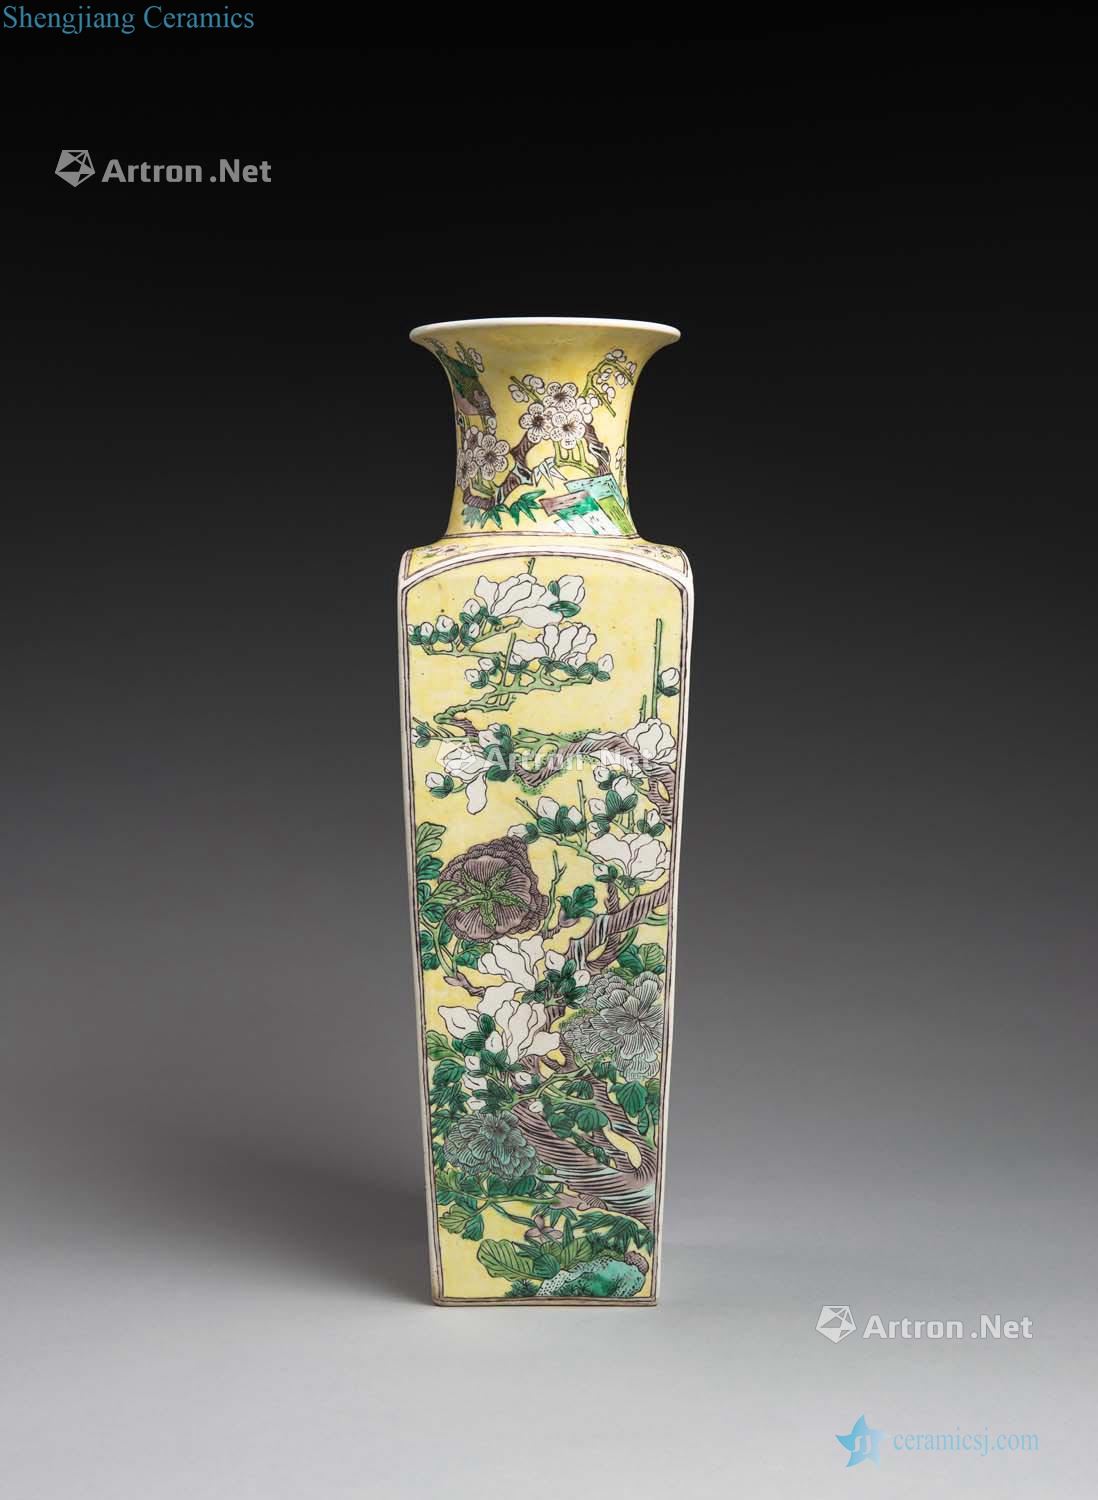 Qing dynasty in the 19th century The colorful painting of flowers and vase